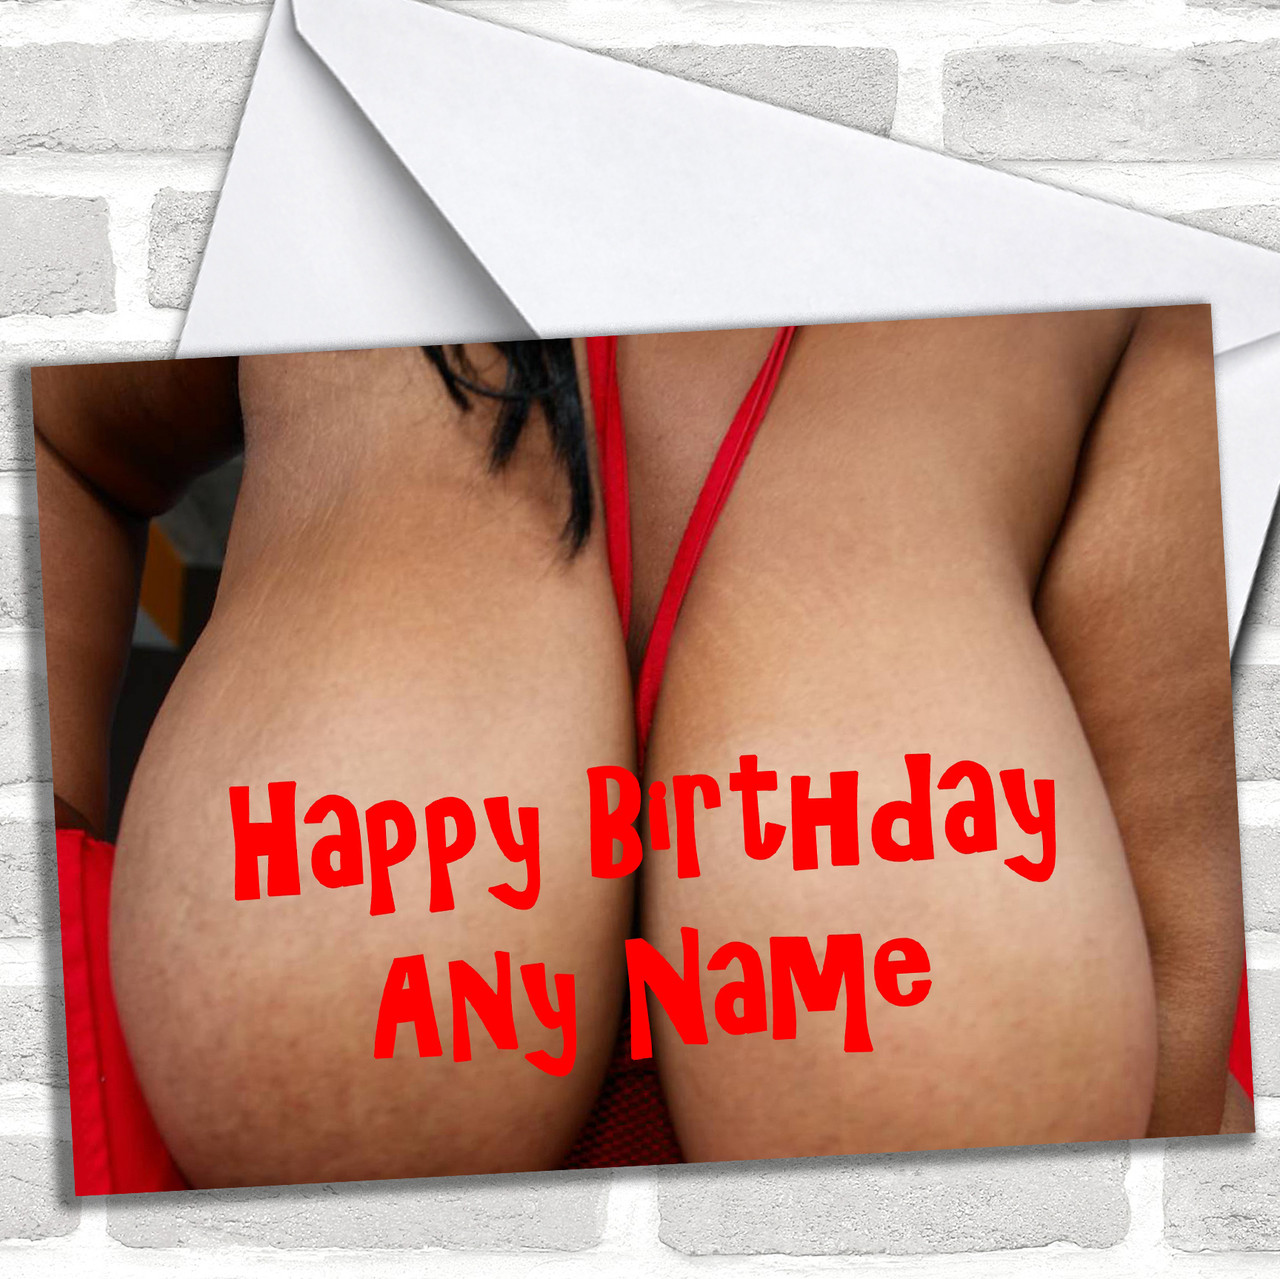 brooke mccown recommends happy birthday tits pic